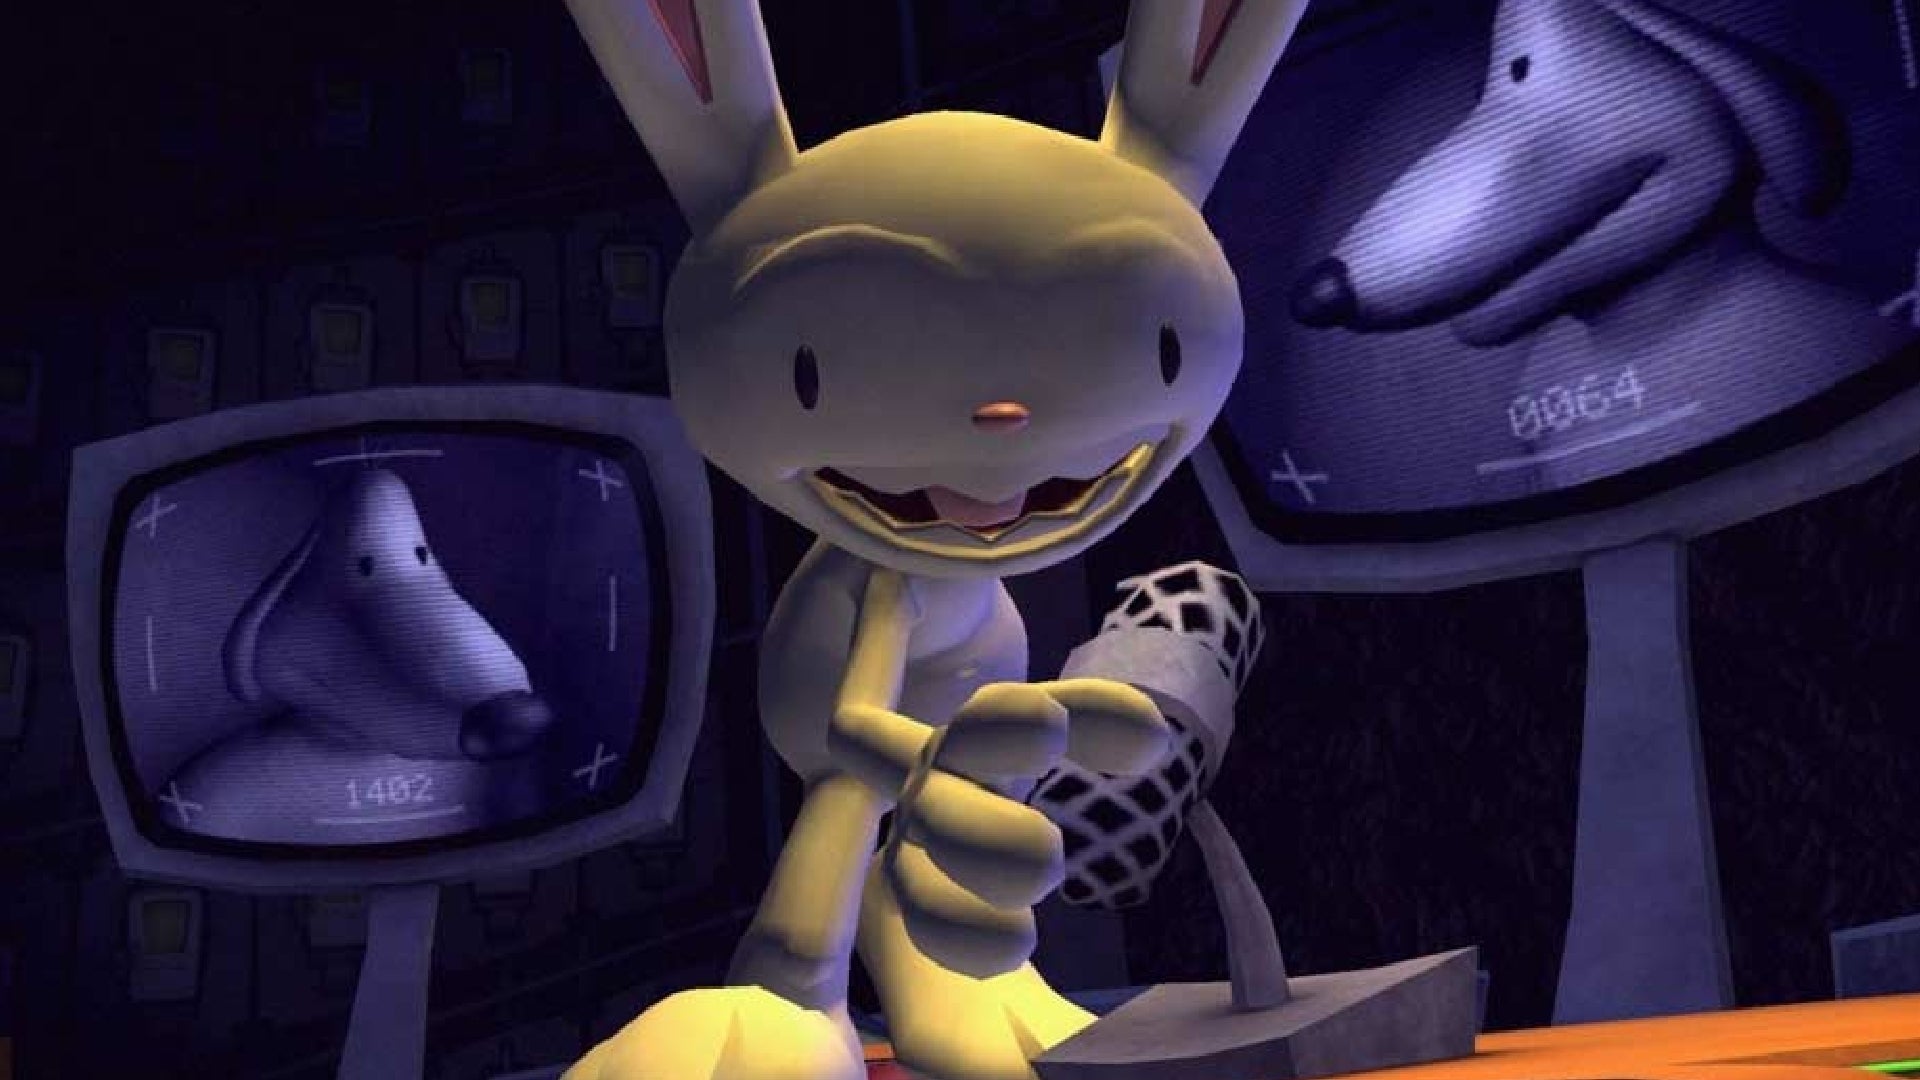 A screenshot from Sam & Max: The Devil's Playhouse showing Max looking surprised in front of monitors displaying Sam's head